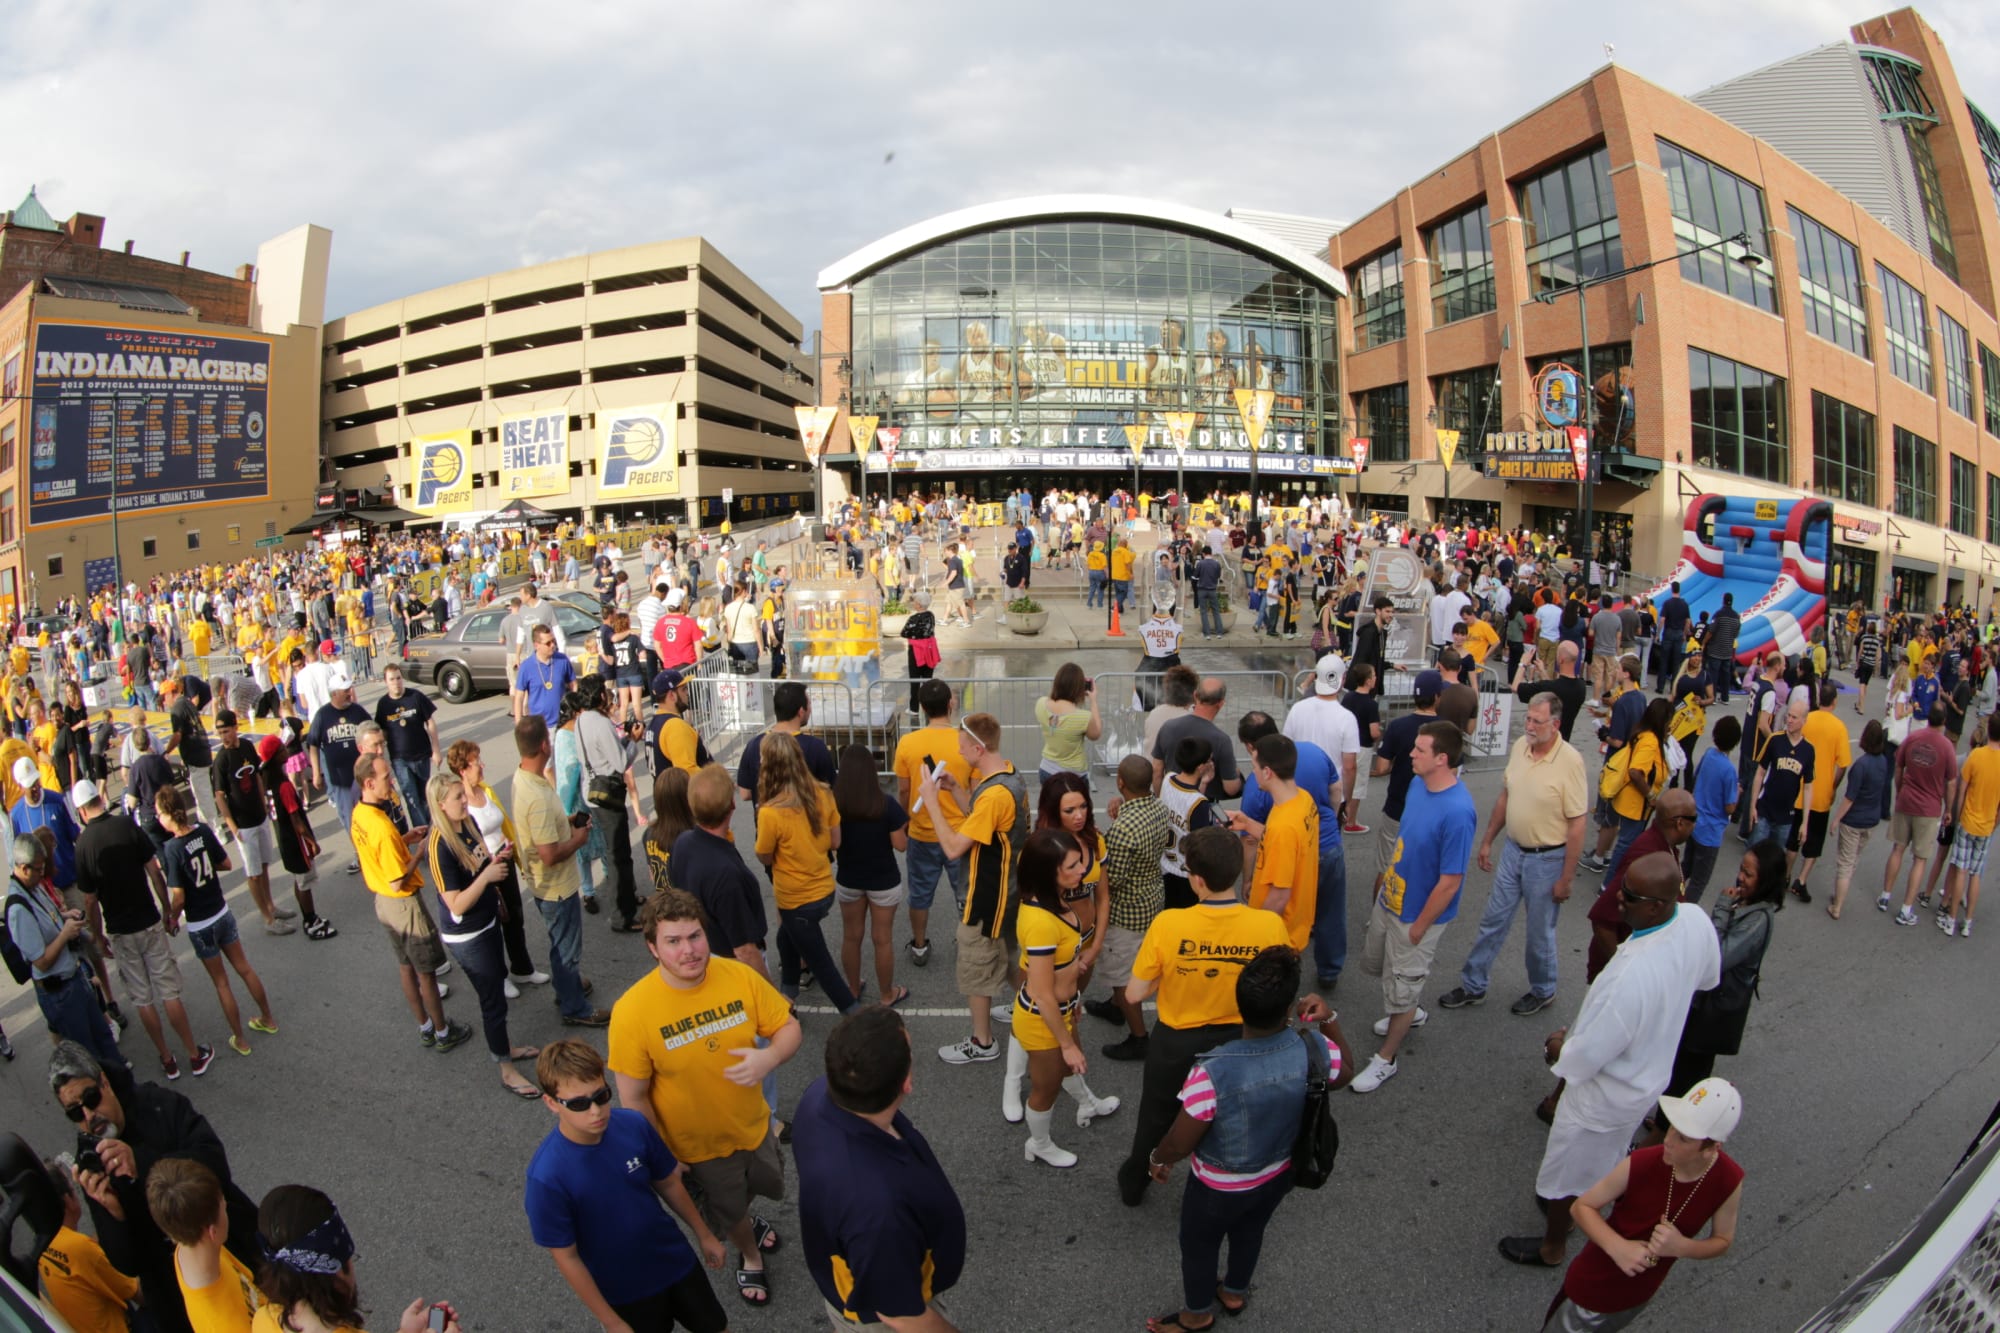 Indiana Pacers: The history of the franchise should be used for retool